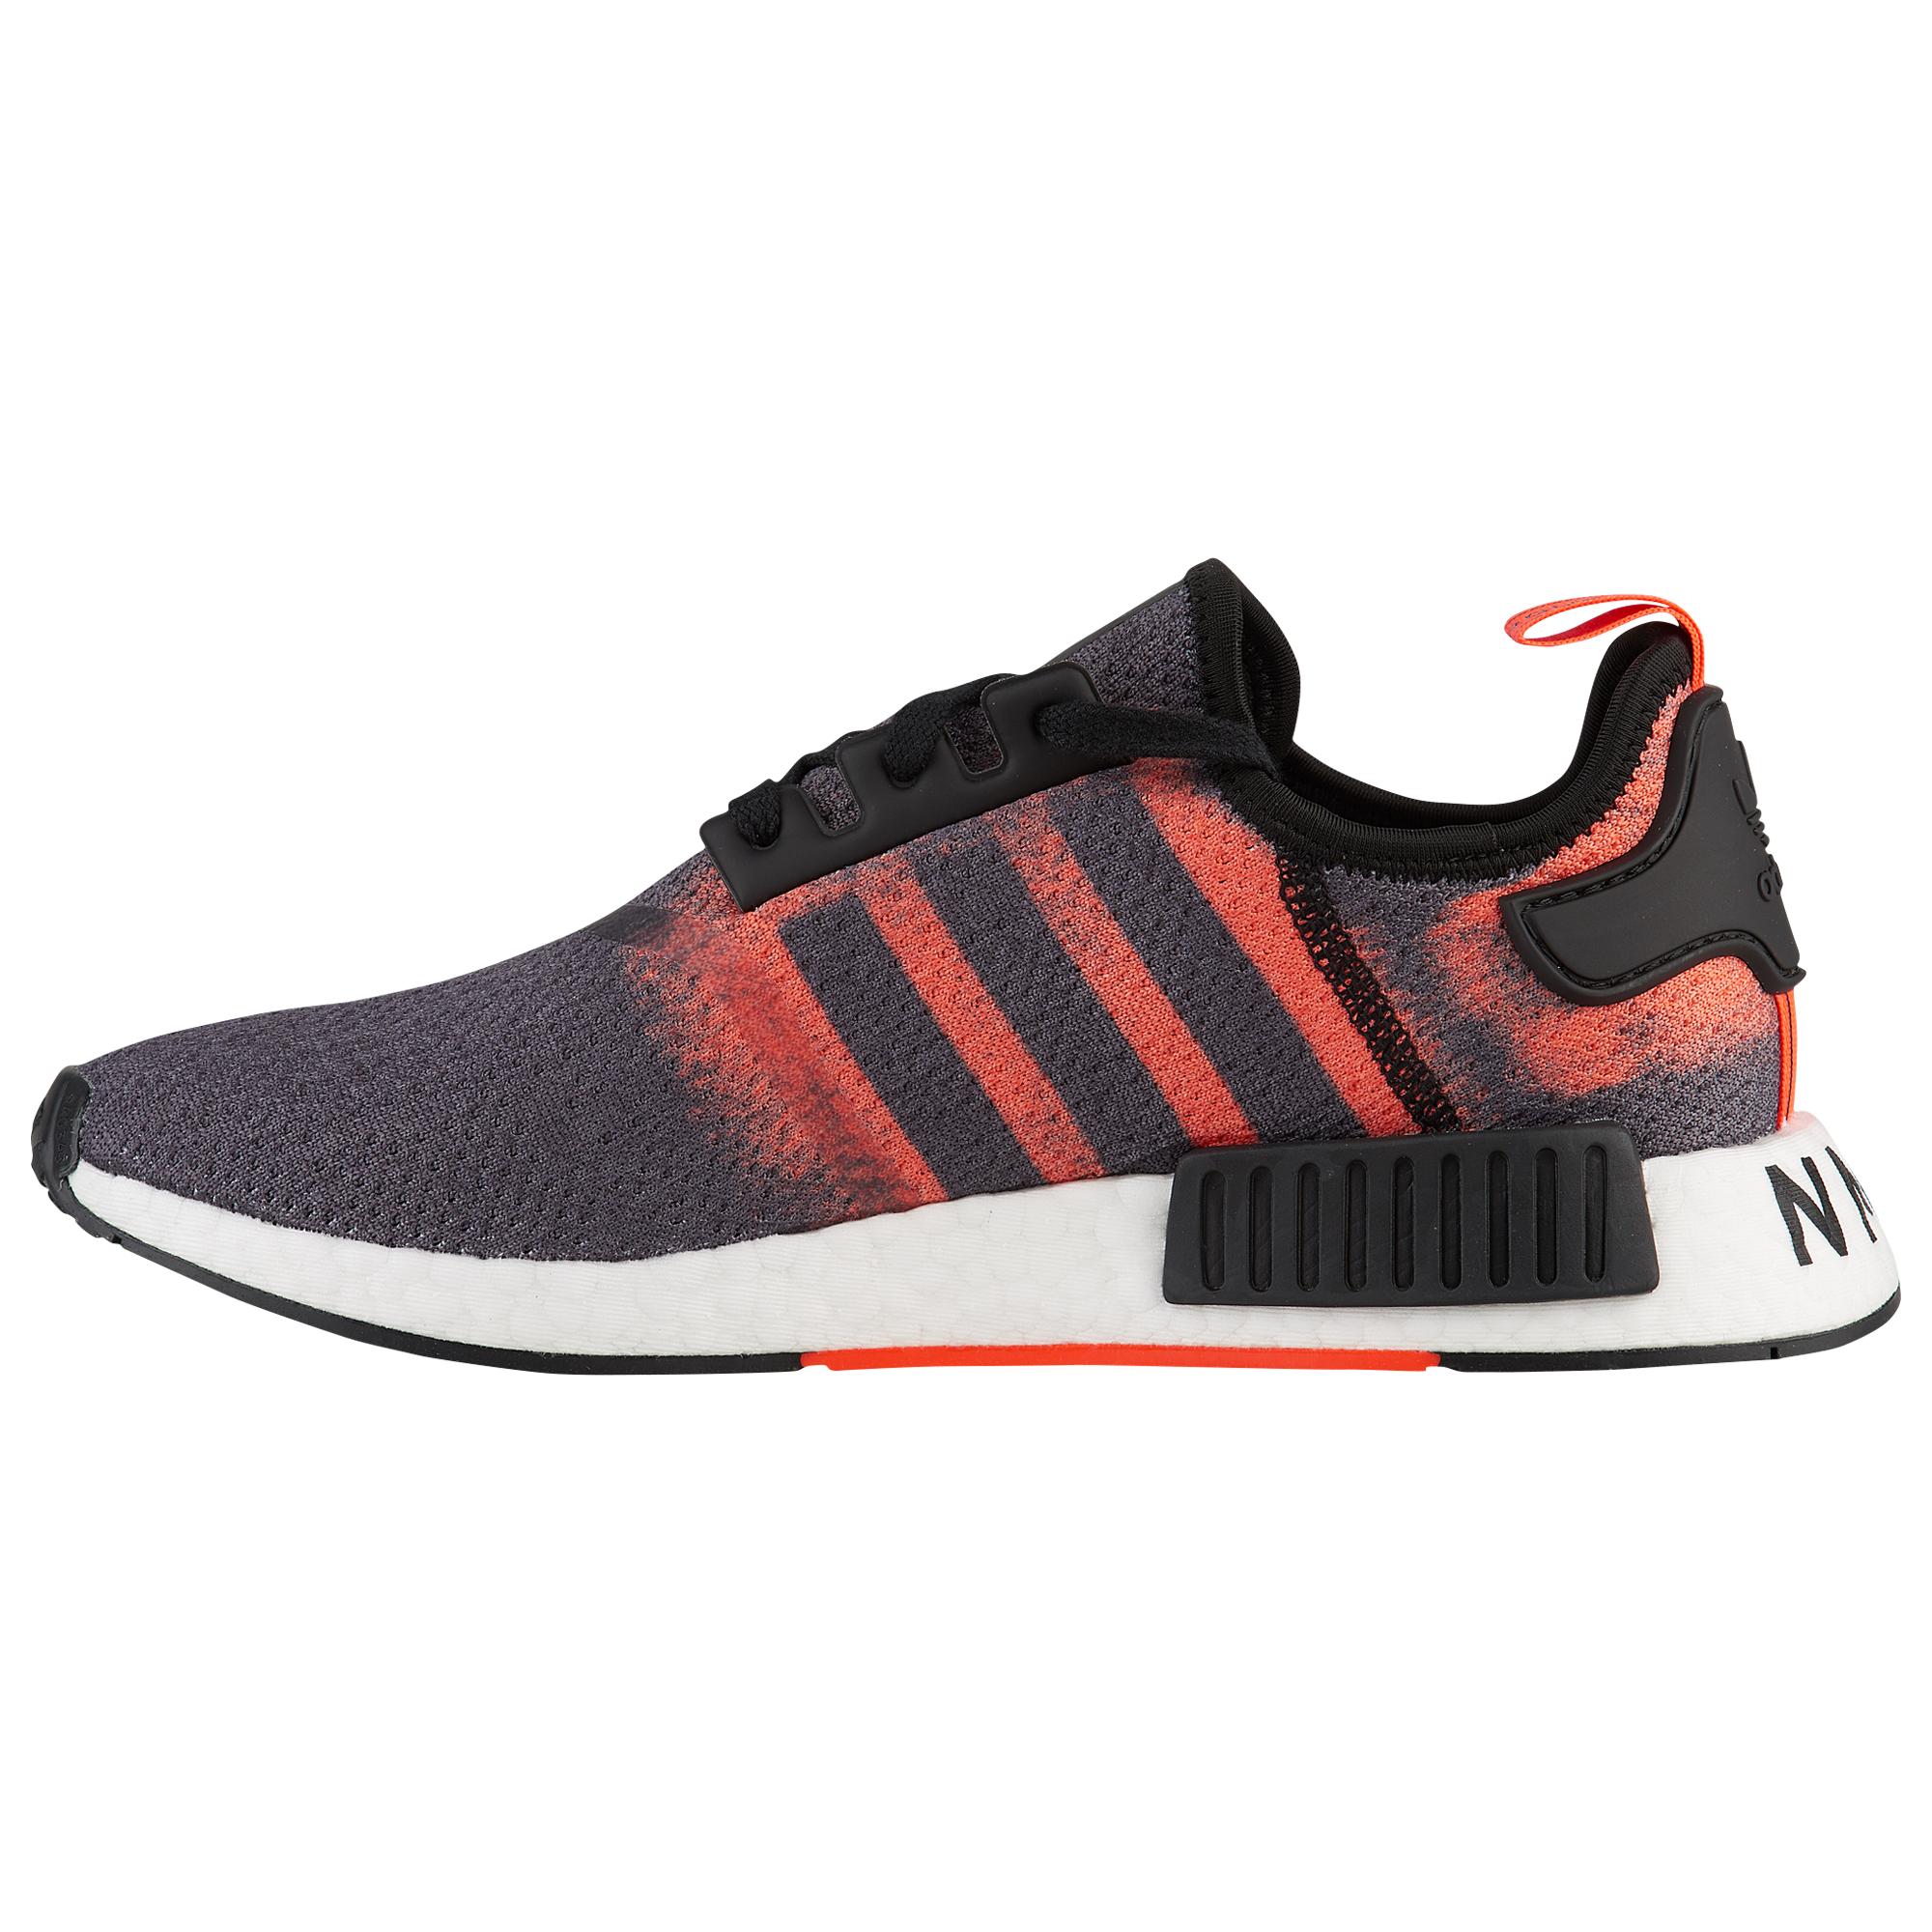 adidas Rubber Nmd R1 Running Shoes in Black for Men - Lyst